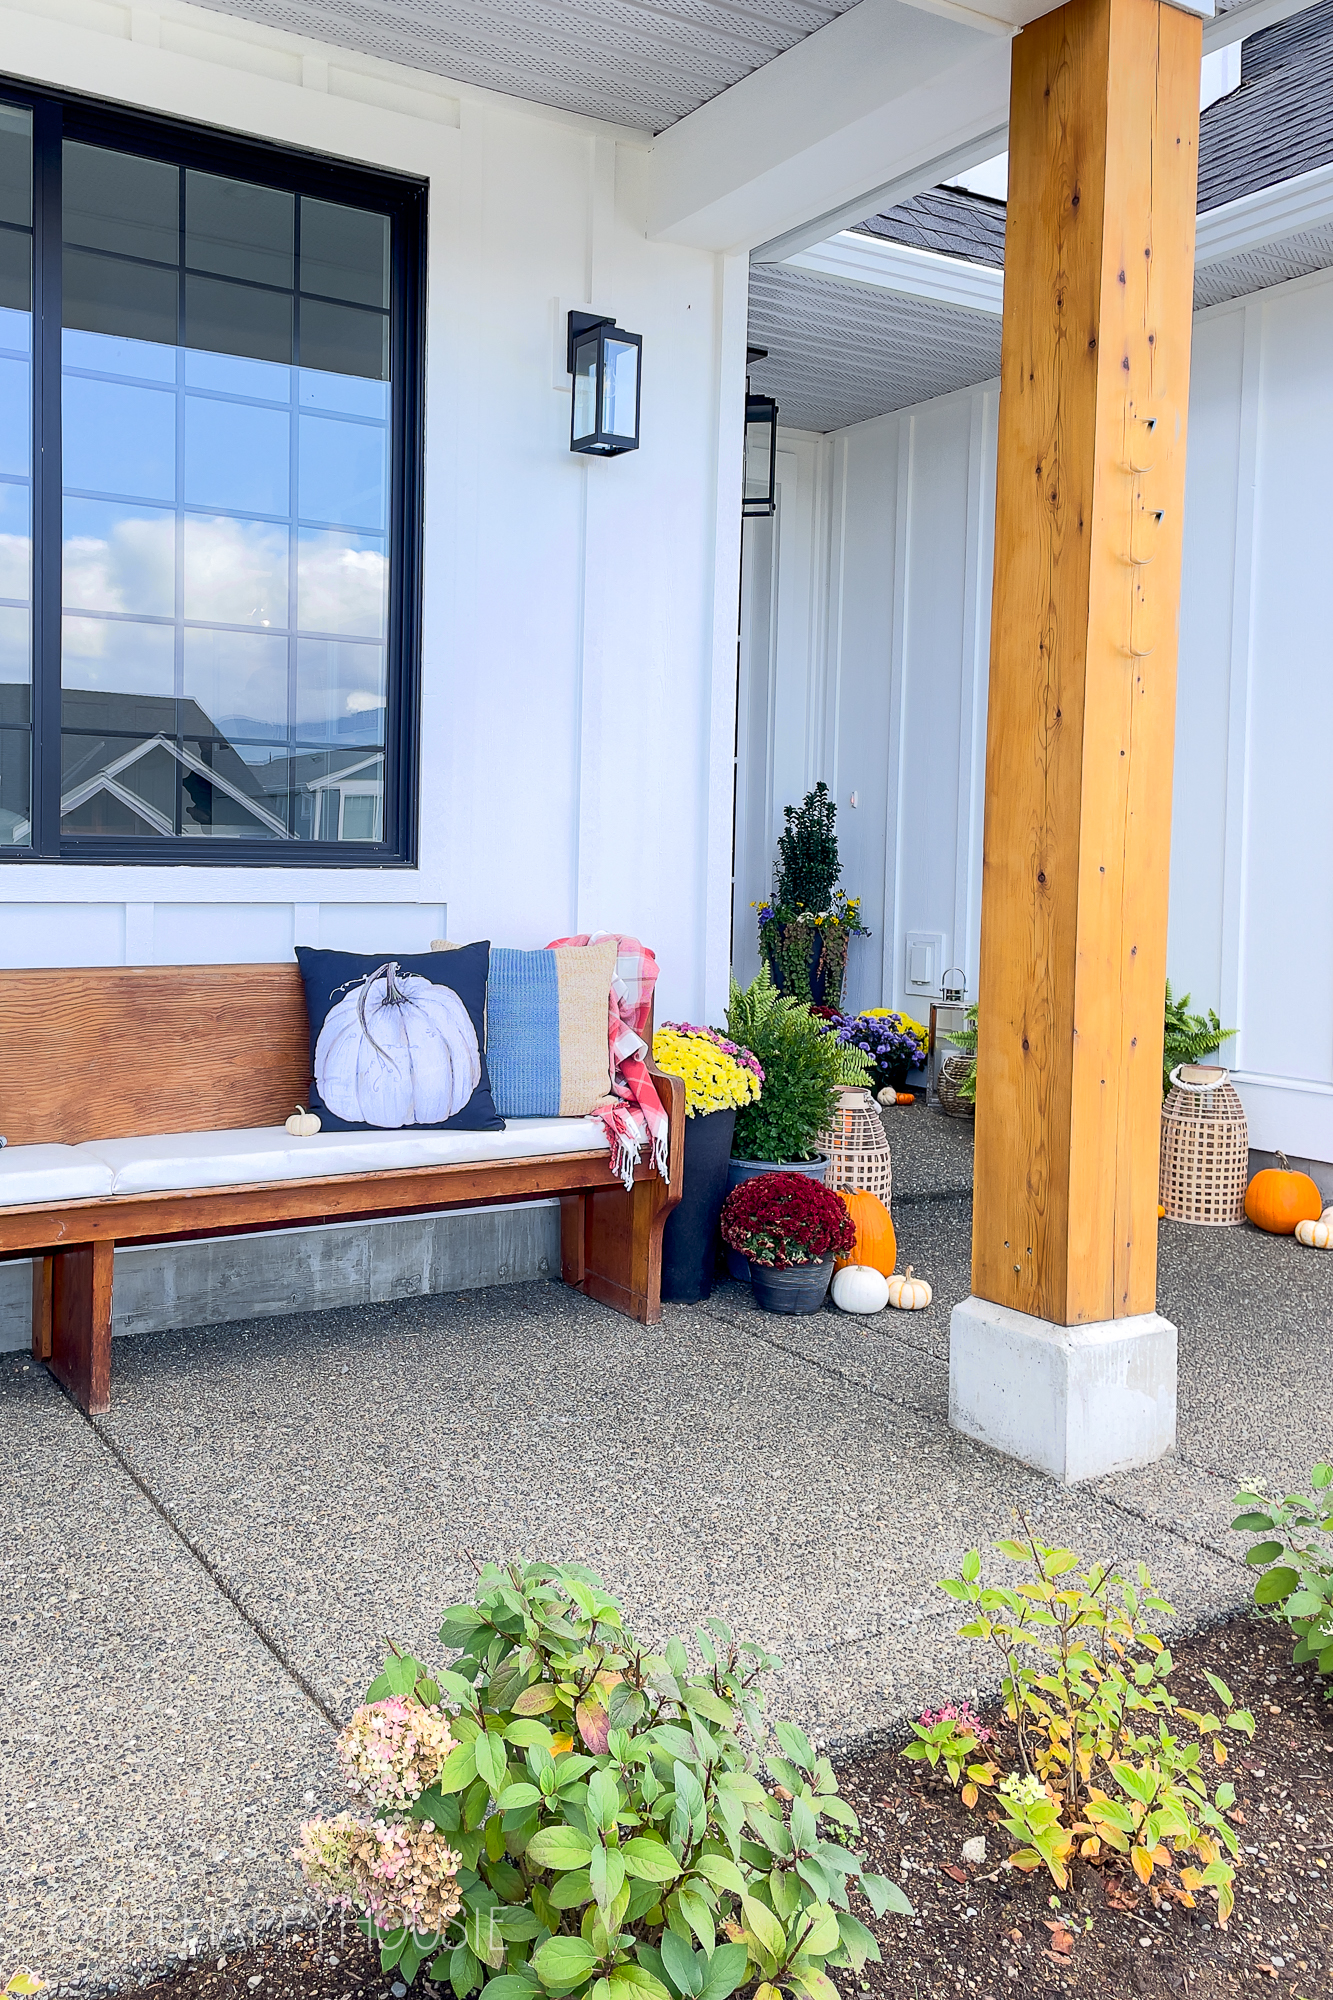 On the front porch there is a small wooden bench with throw pillows on it.